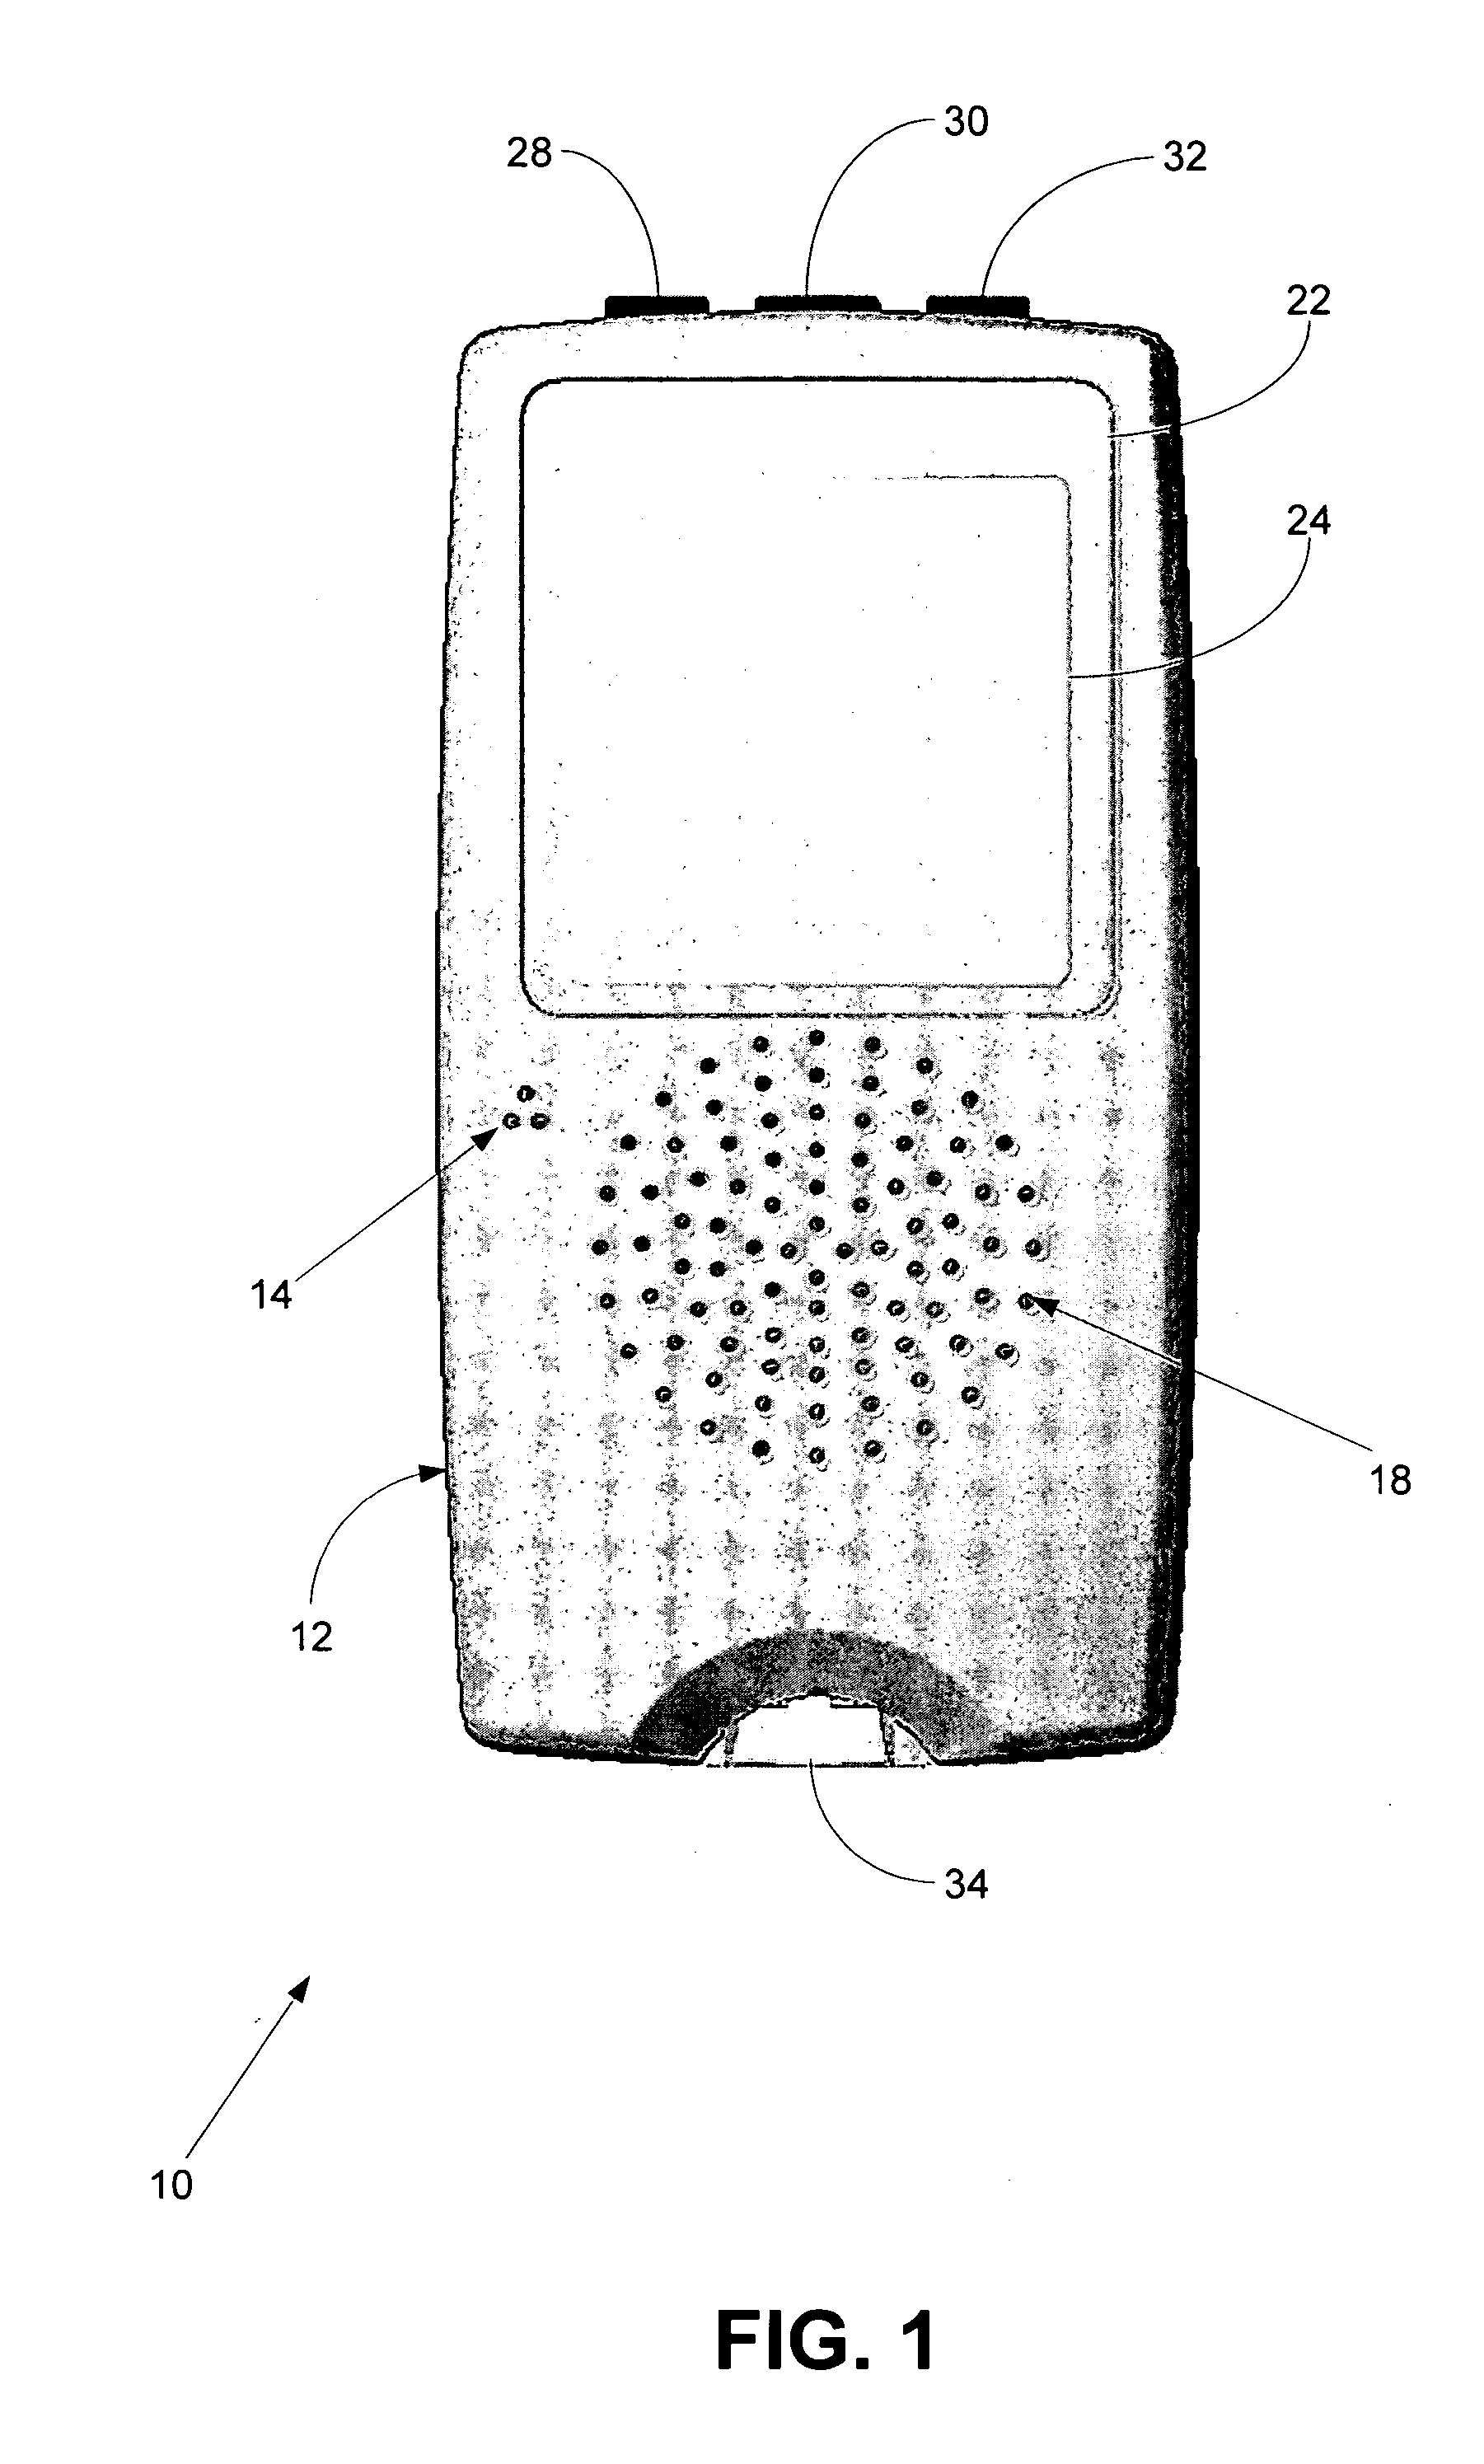 Medical diagnostic testing device with voice message capability